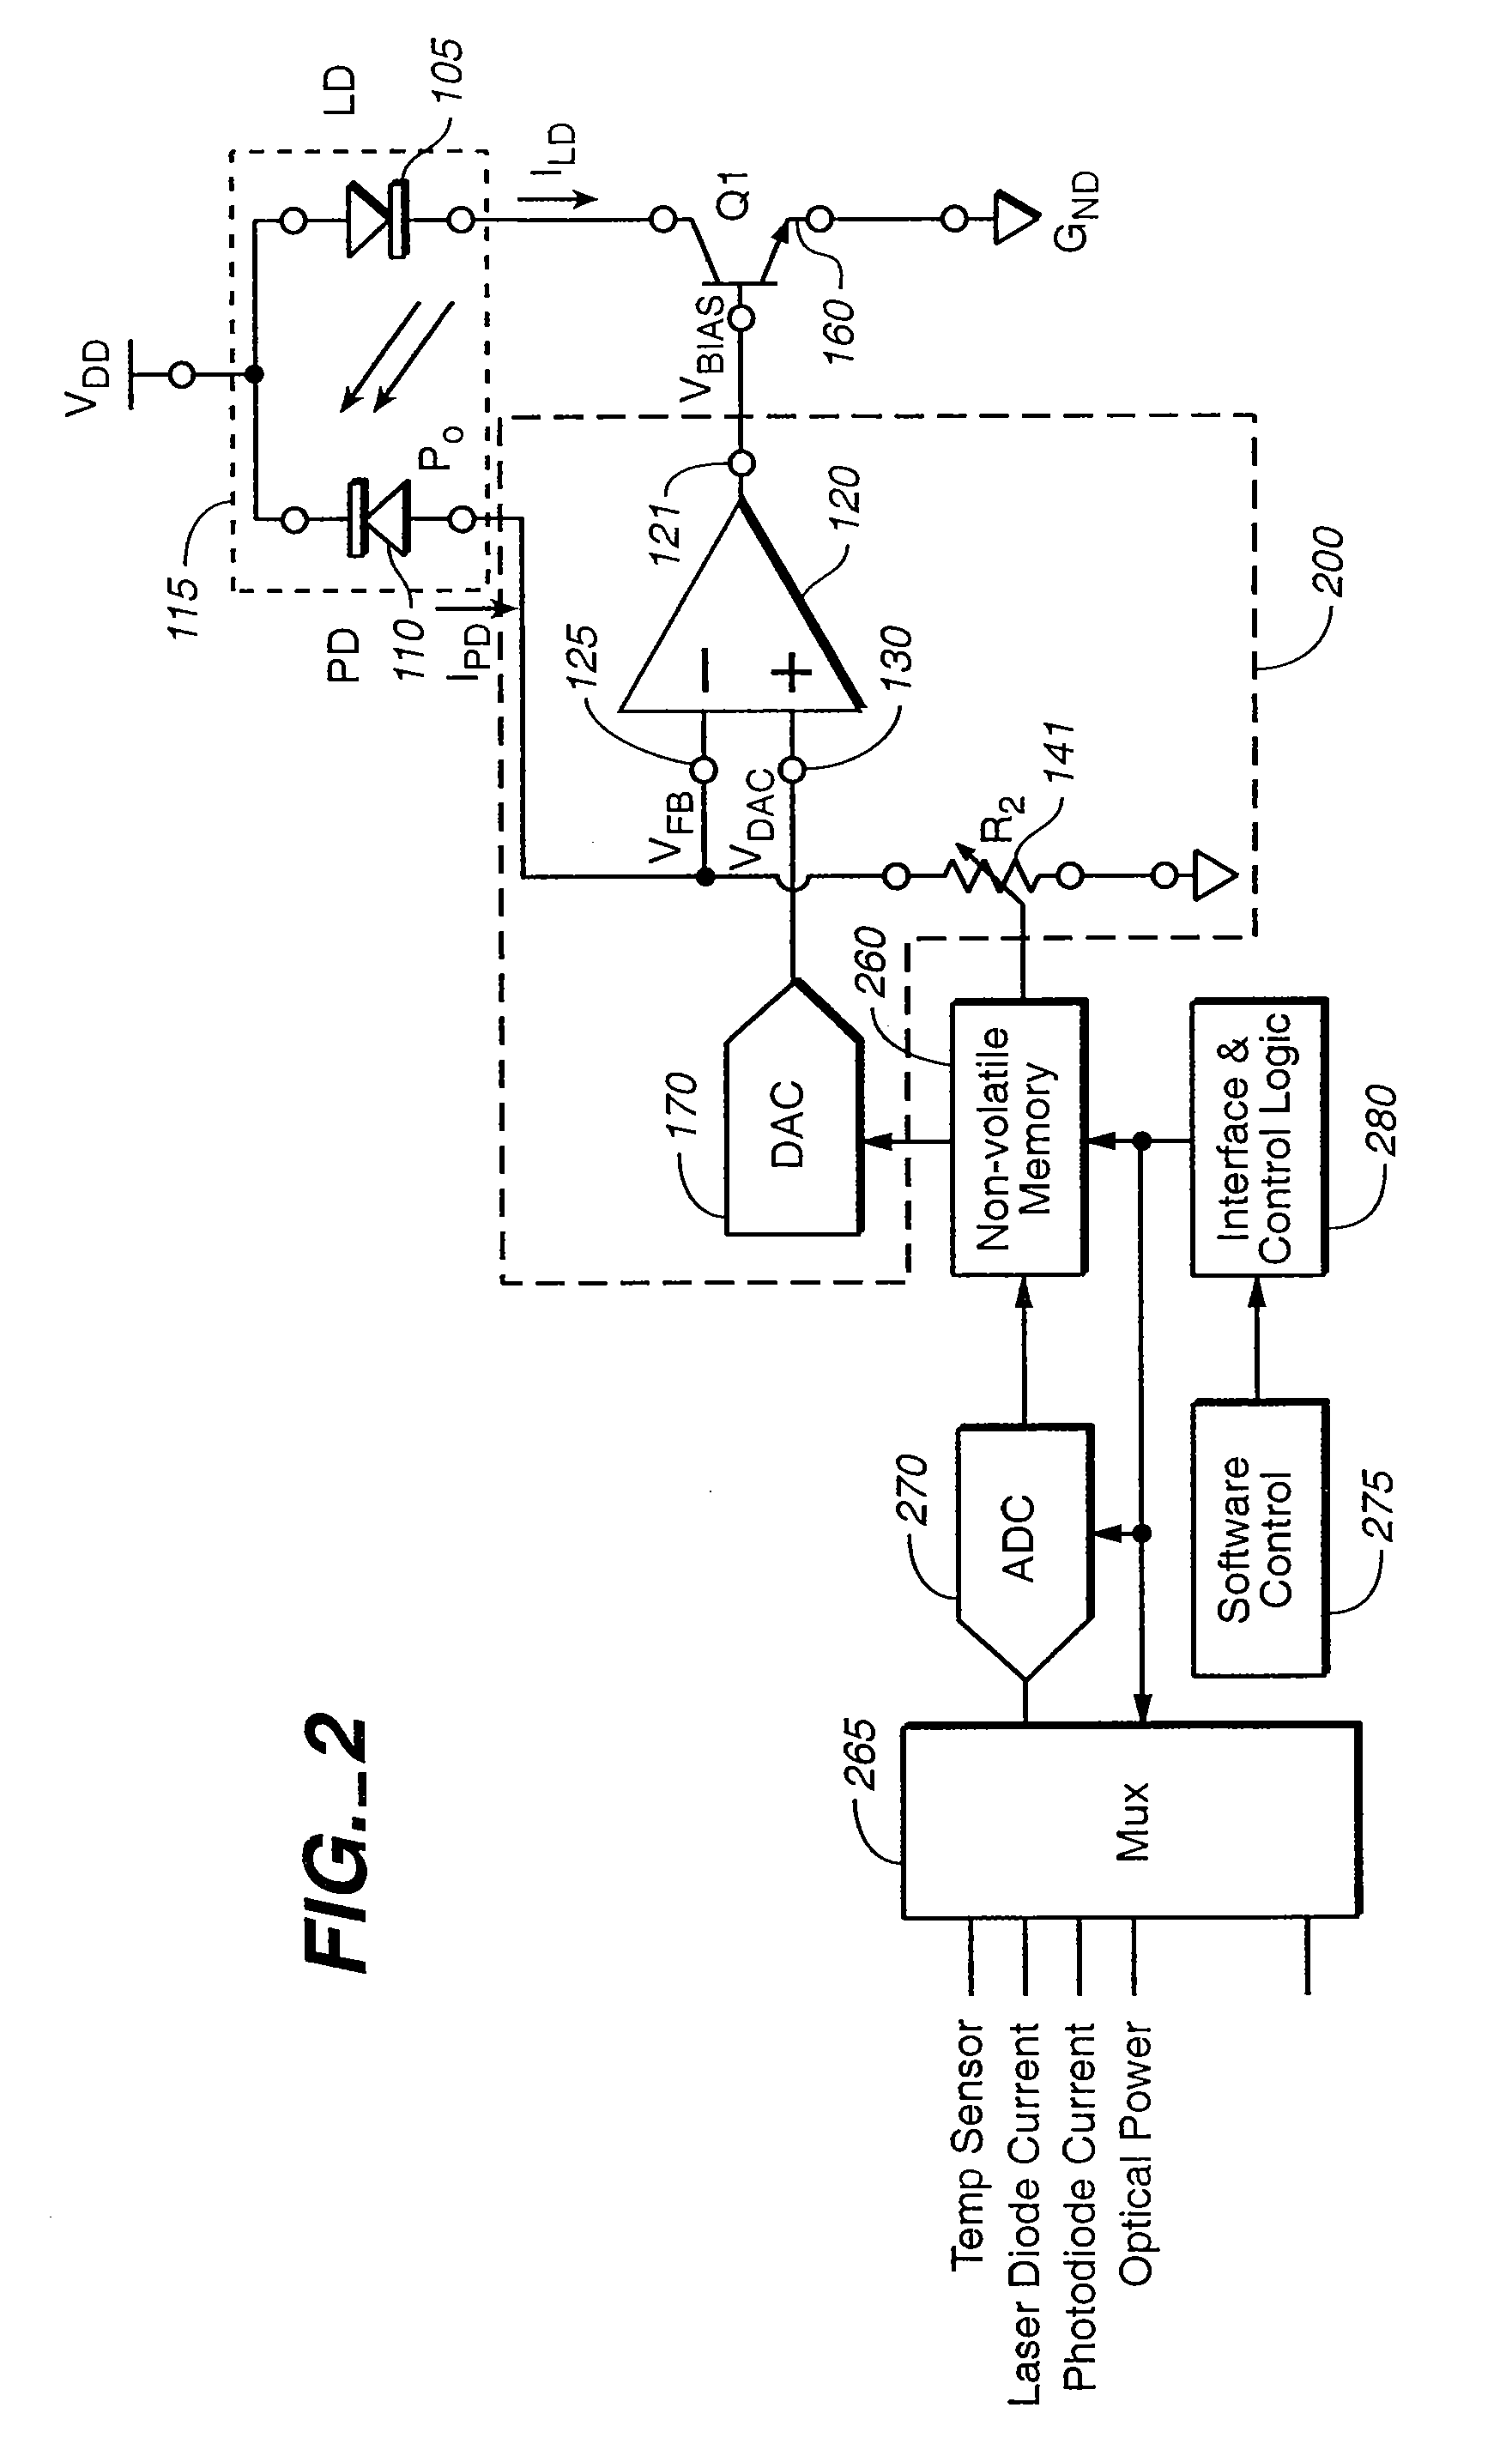 Automatic control of laser diode current and optical power output